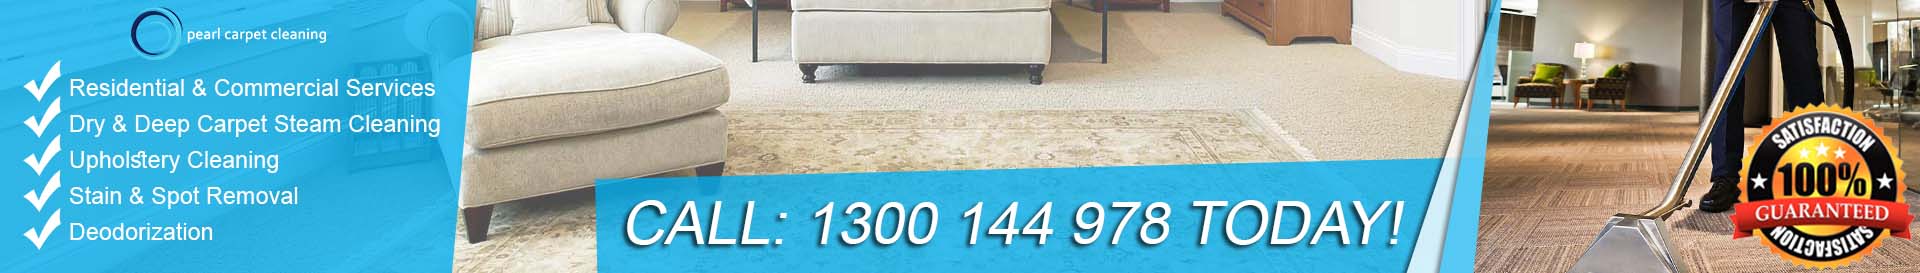 pearlcarpetcleaning_callbanner